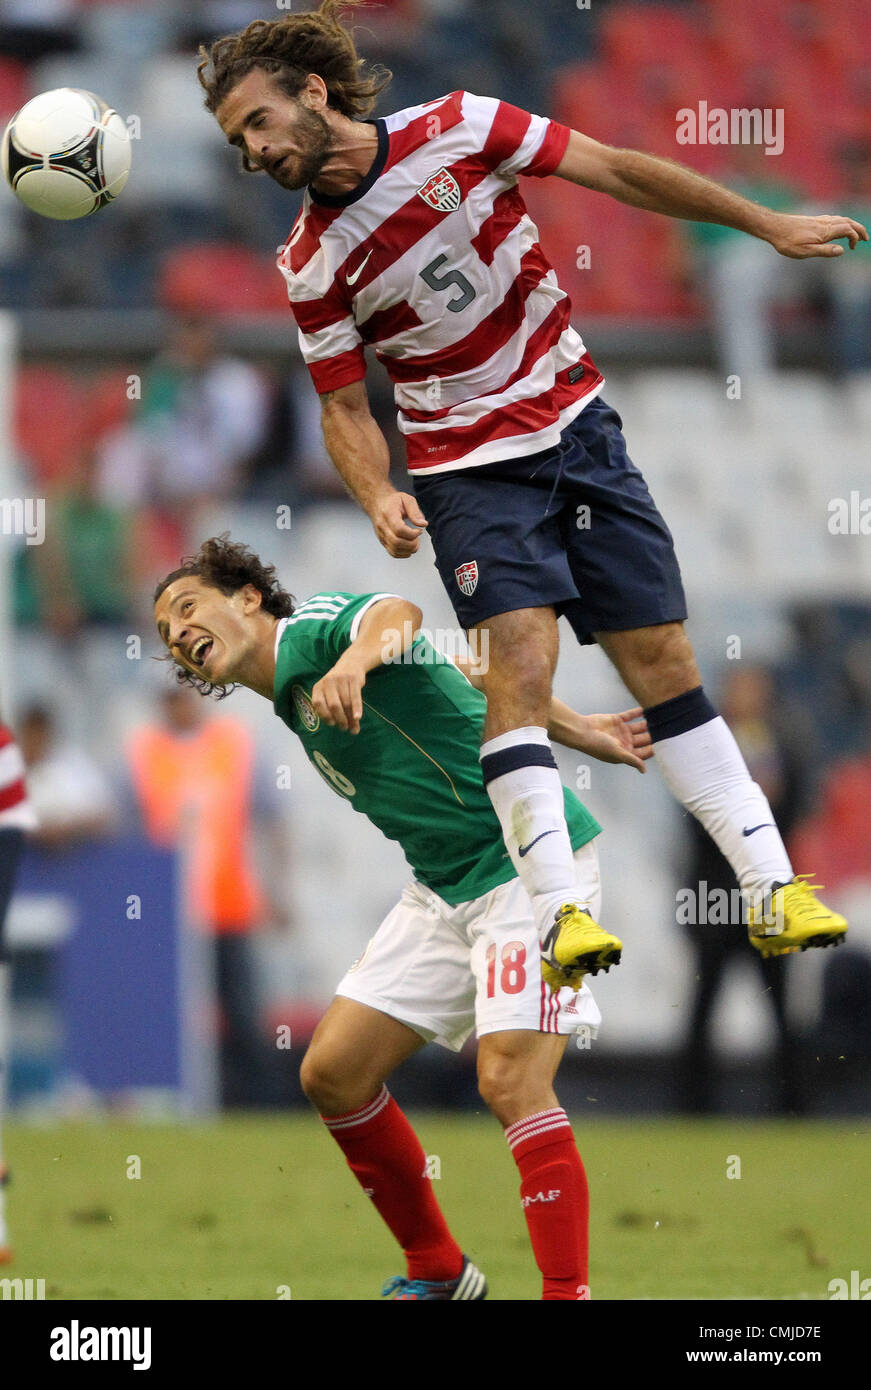 15th Aug 2012. 15.08.2012. Mexico City. Mexico.  Kyle Beckerman (USA) (5) heads the ball over Andres Guardado (MEX) (18). The United States Men's National Team defeated the Mexico Men's National Team 1-0 at Estadio Azteca in Mexico City, Mexico in an international friendly soccer match. © Action Plus Sports Images / Alamy Live News Stock Photo